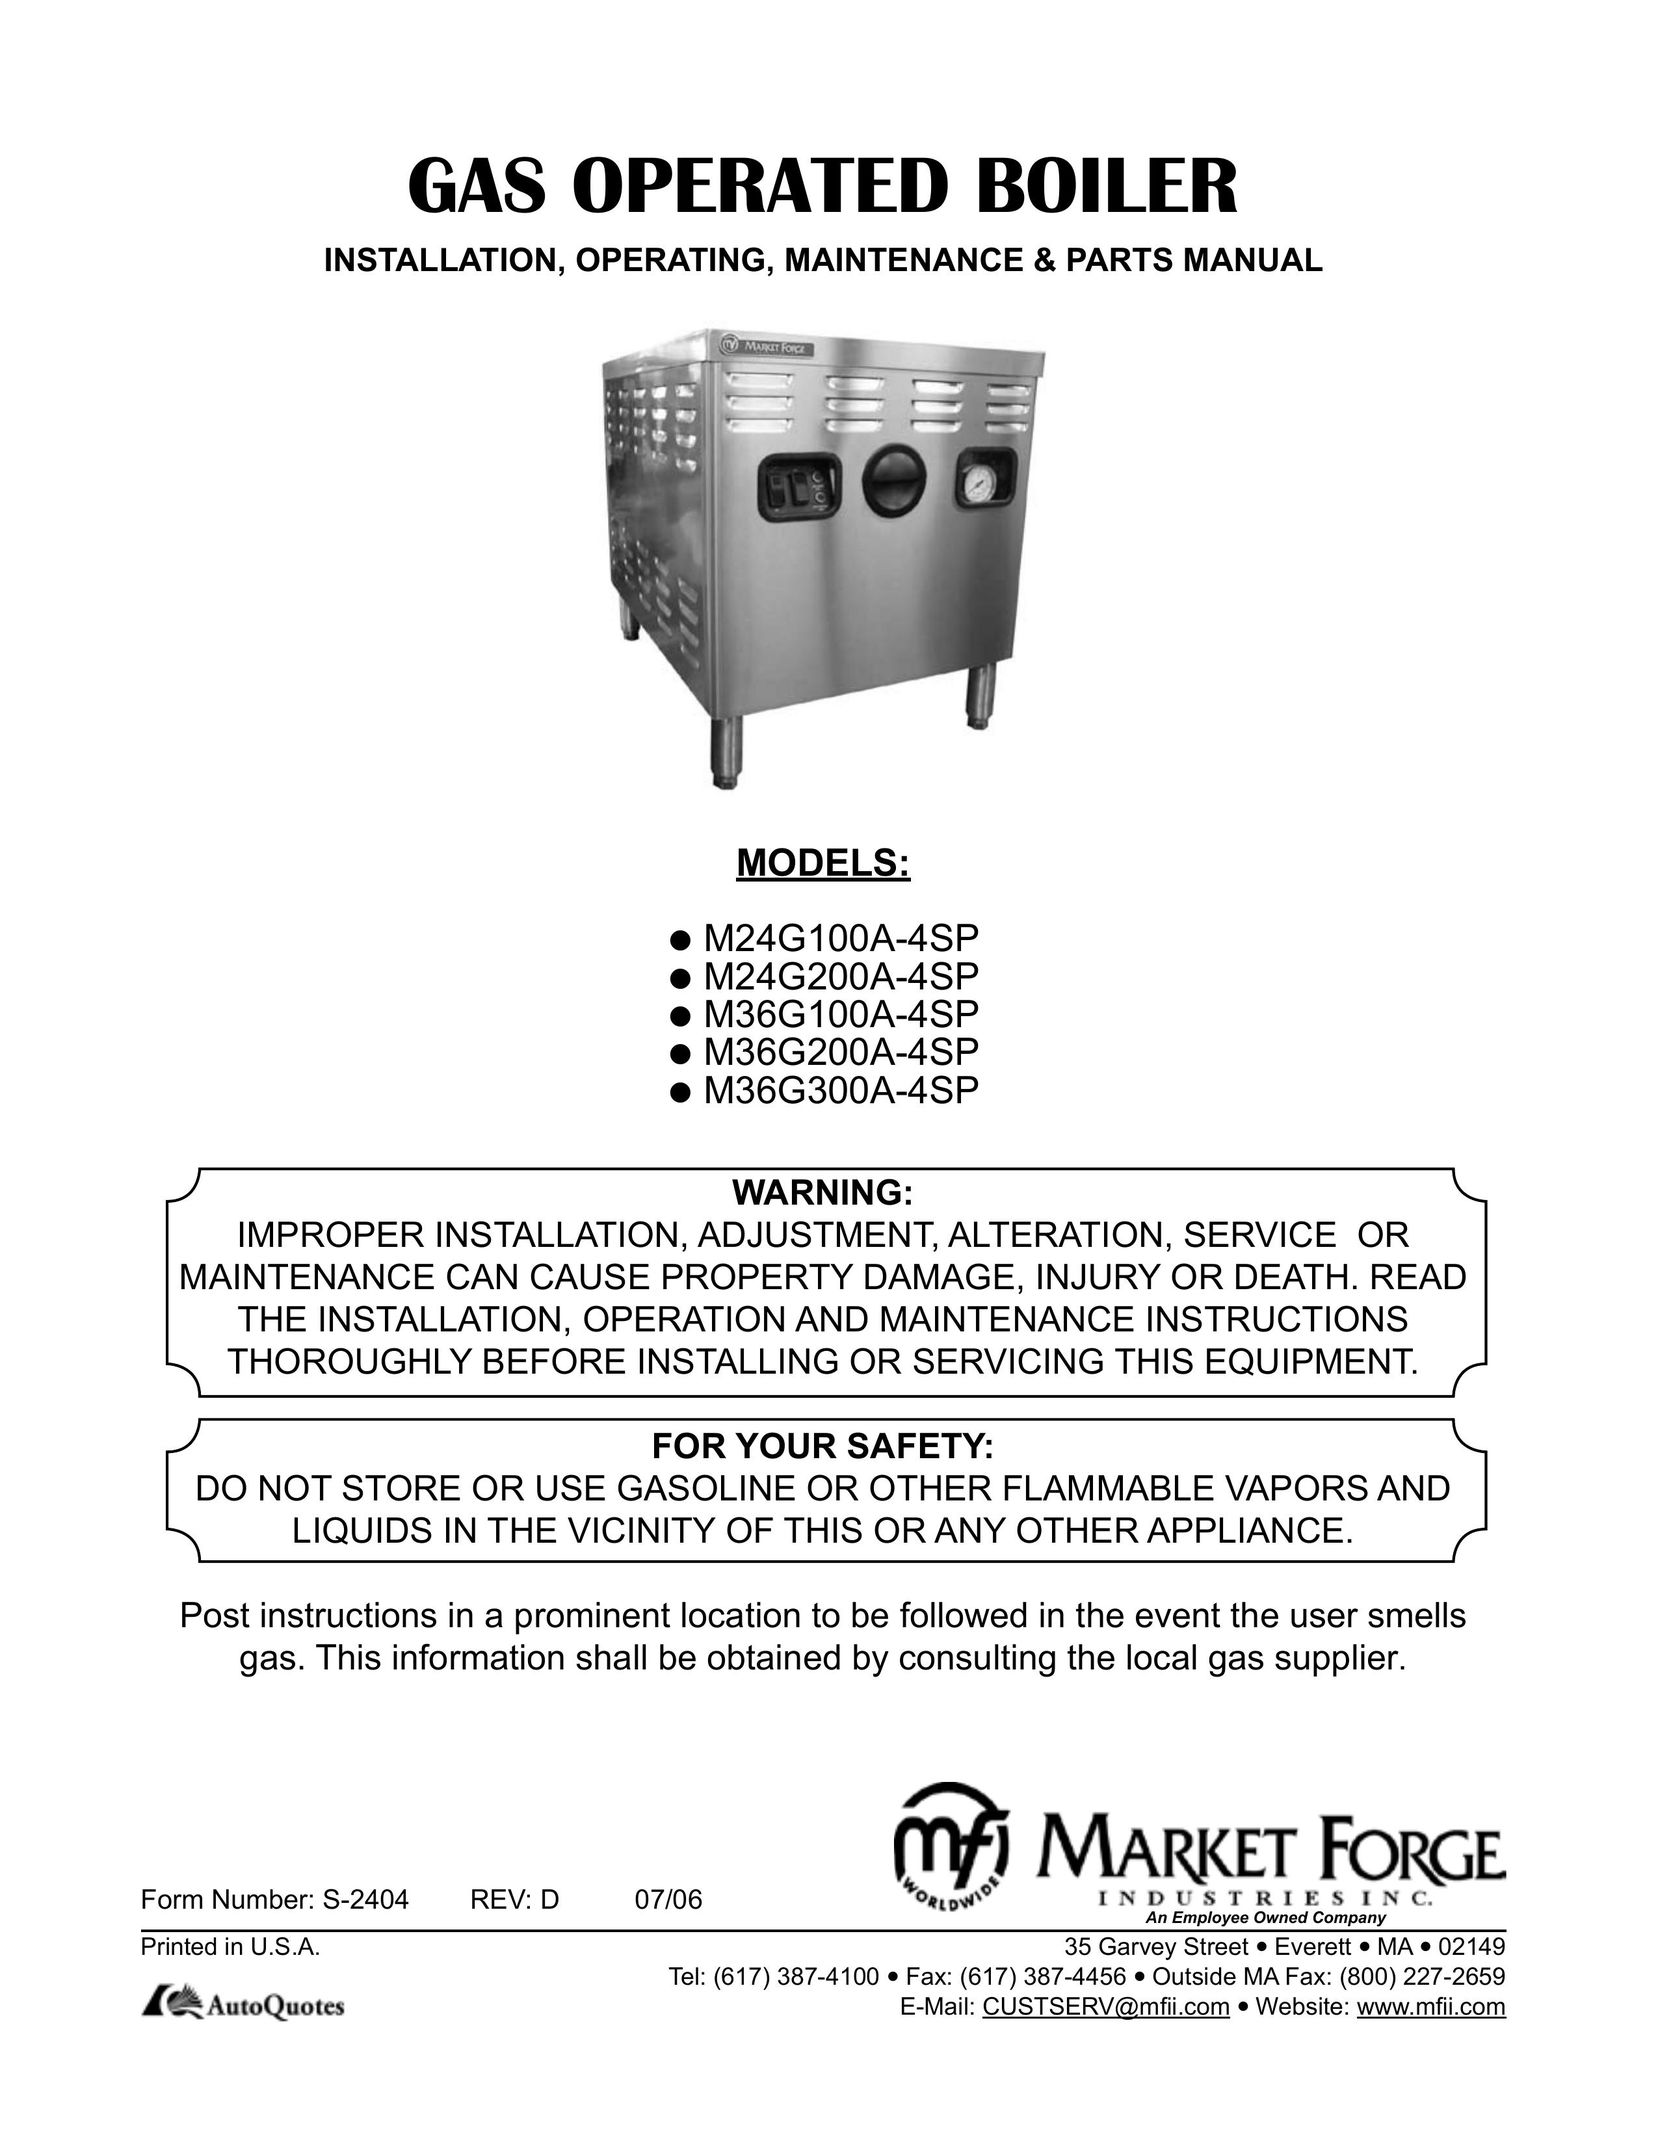 Market Forge Industries M36G300A-4SP Boiler User Manual